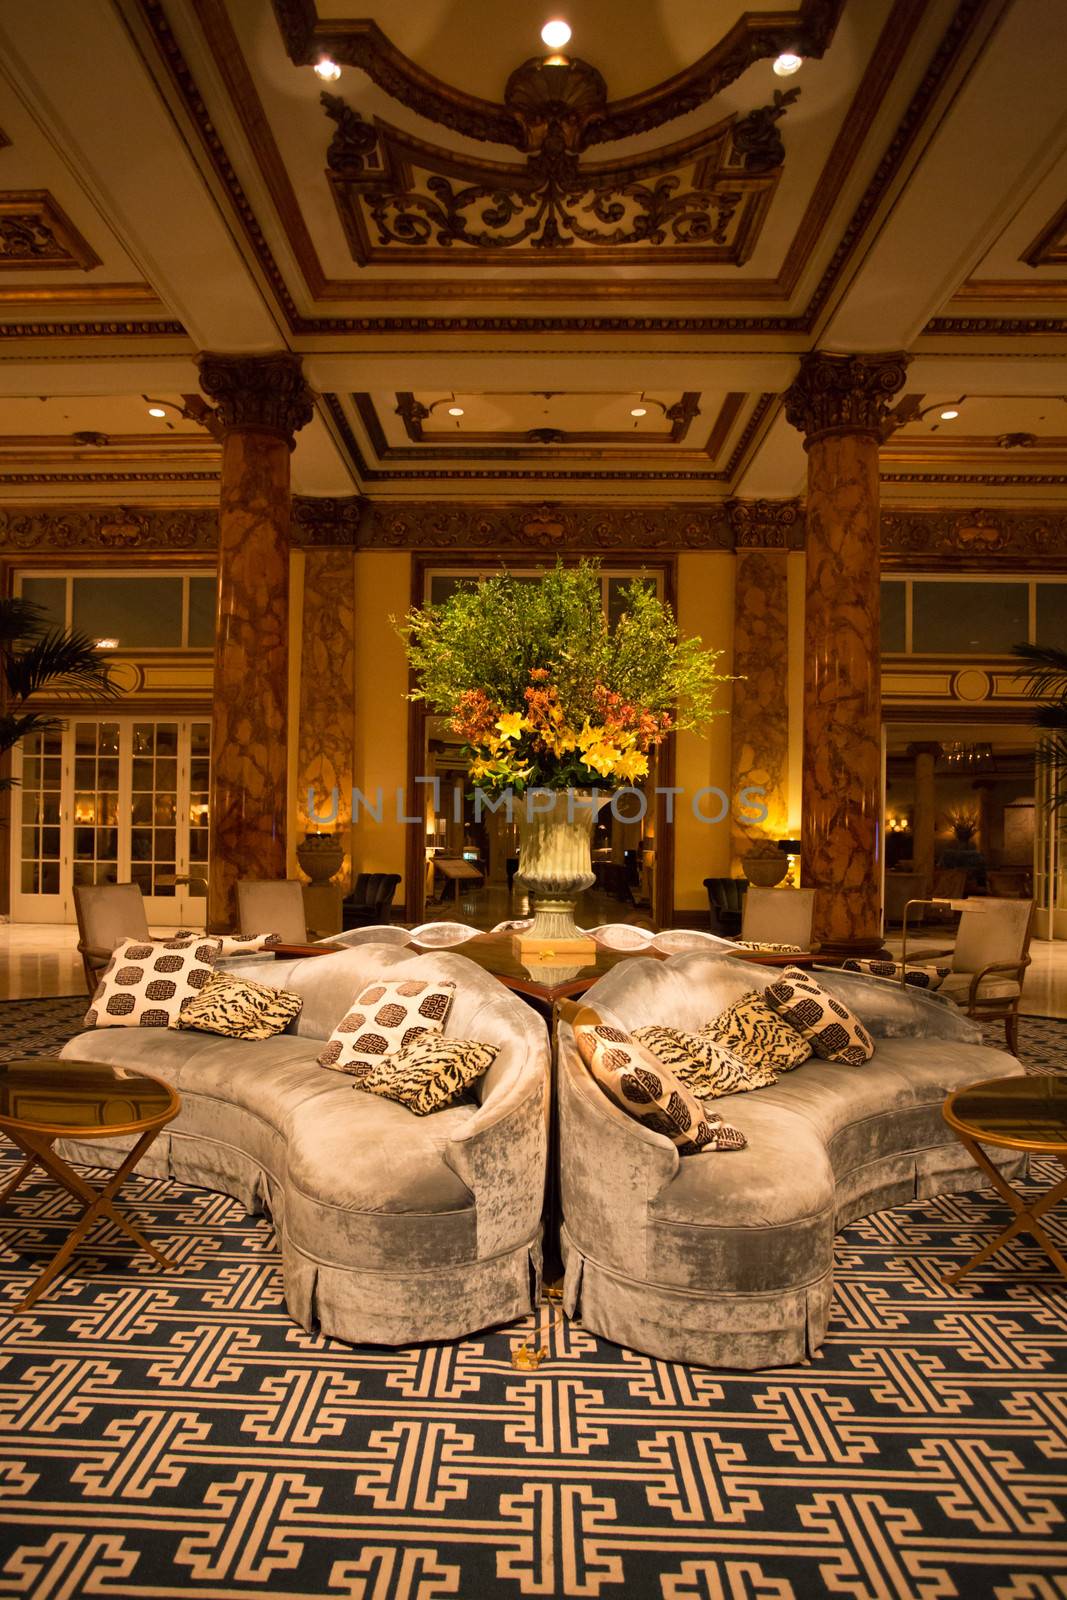 Interior Fairmont Hotel in San Francisco by watchtheworld